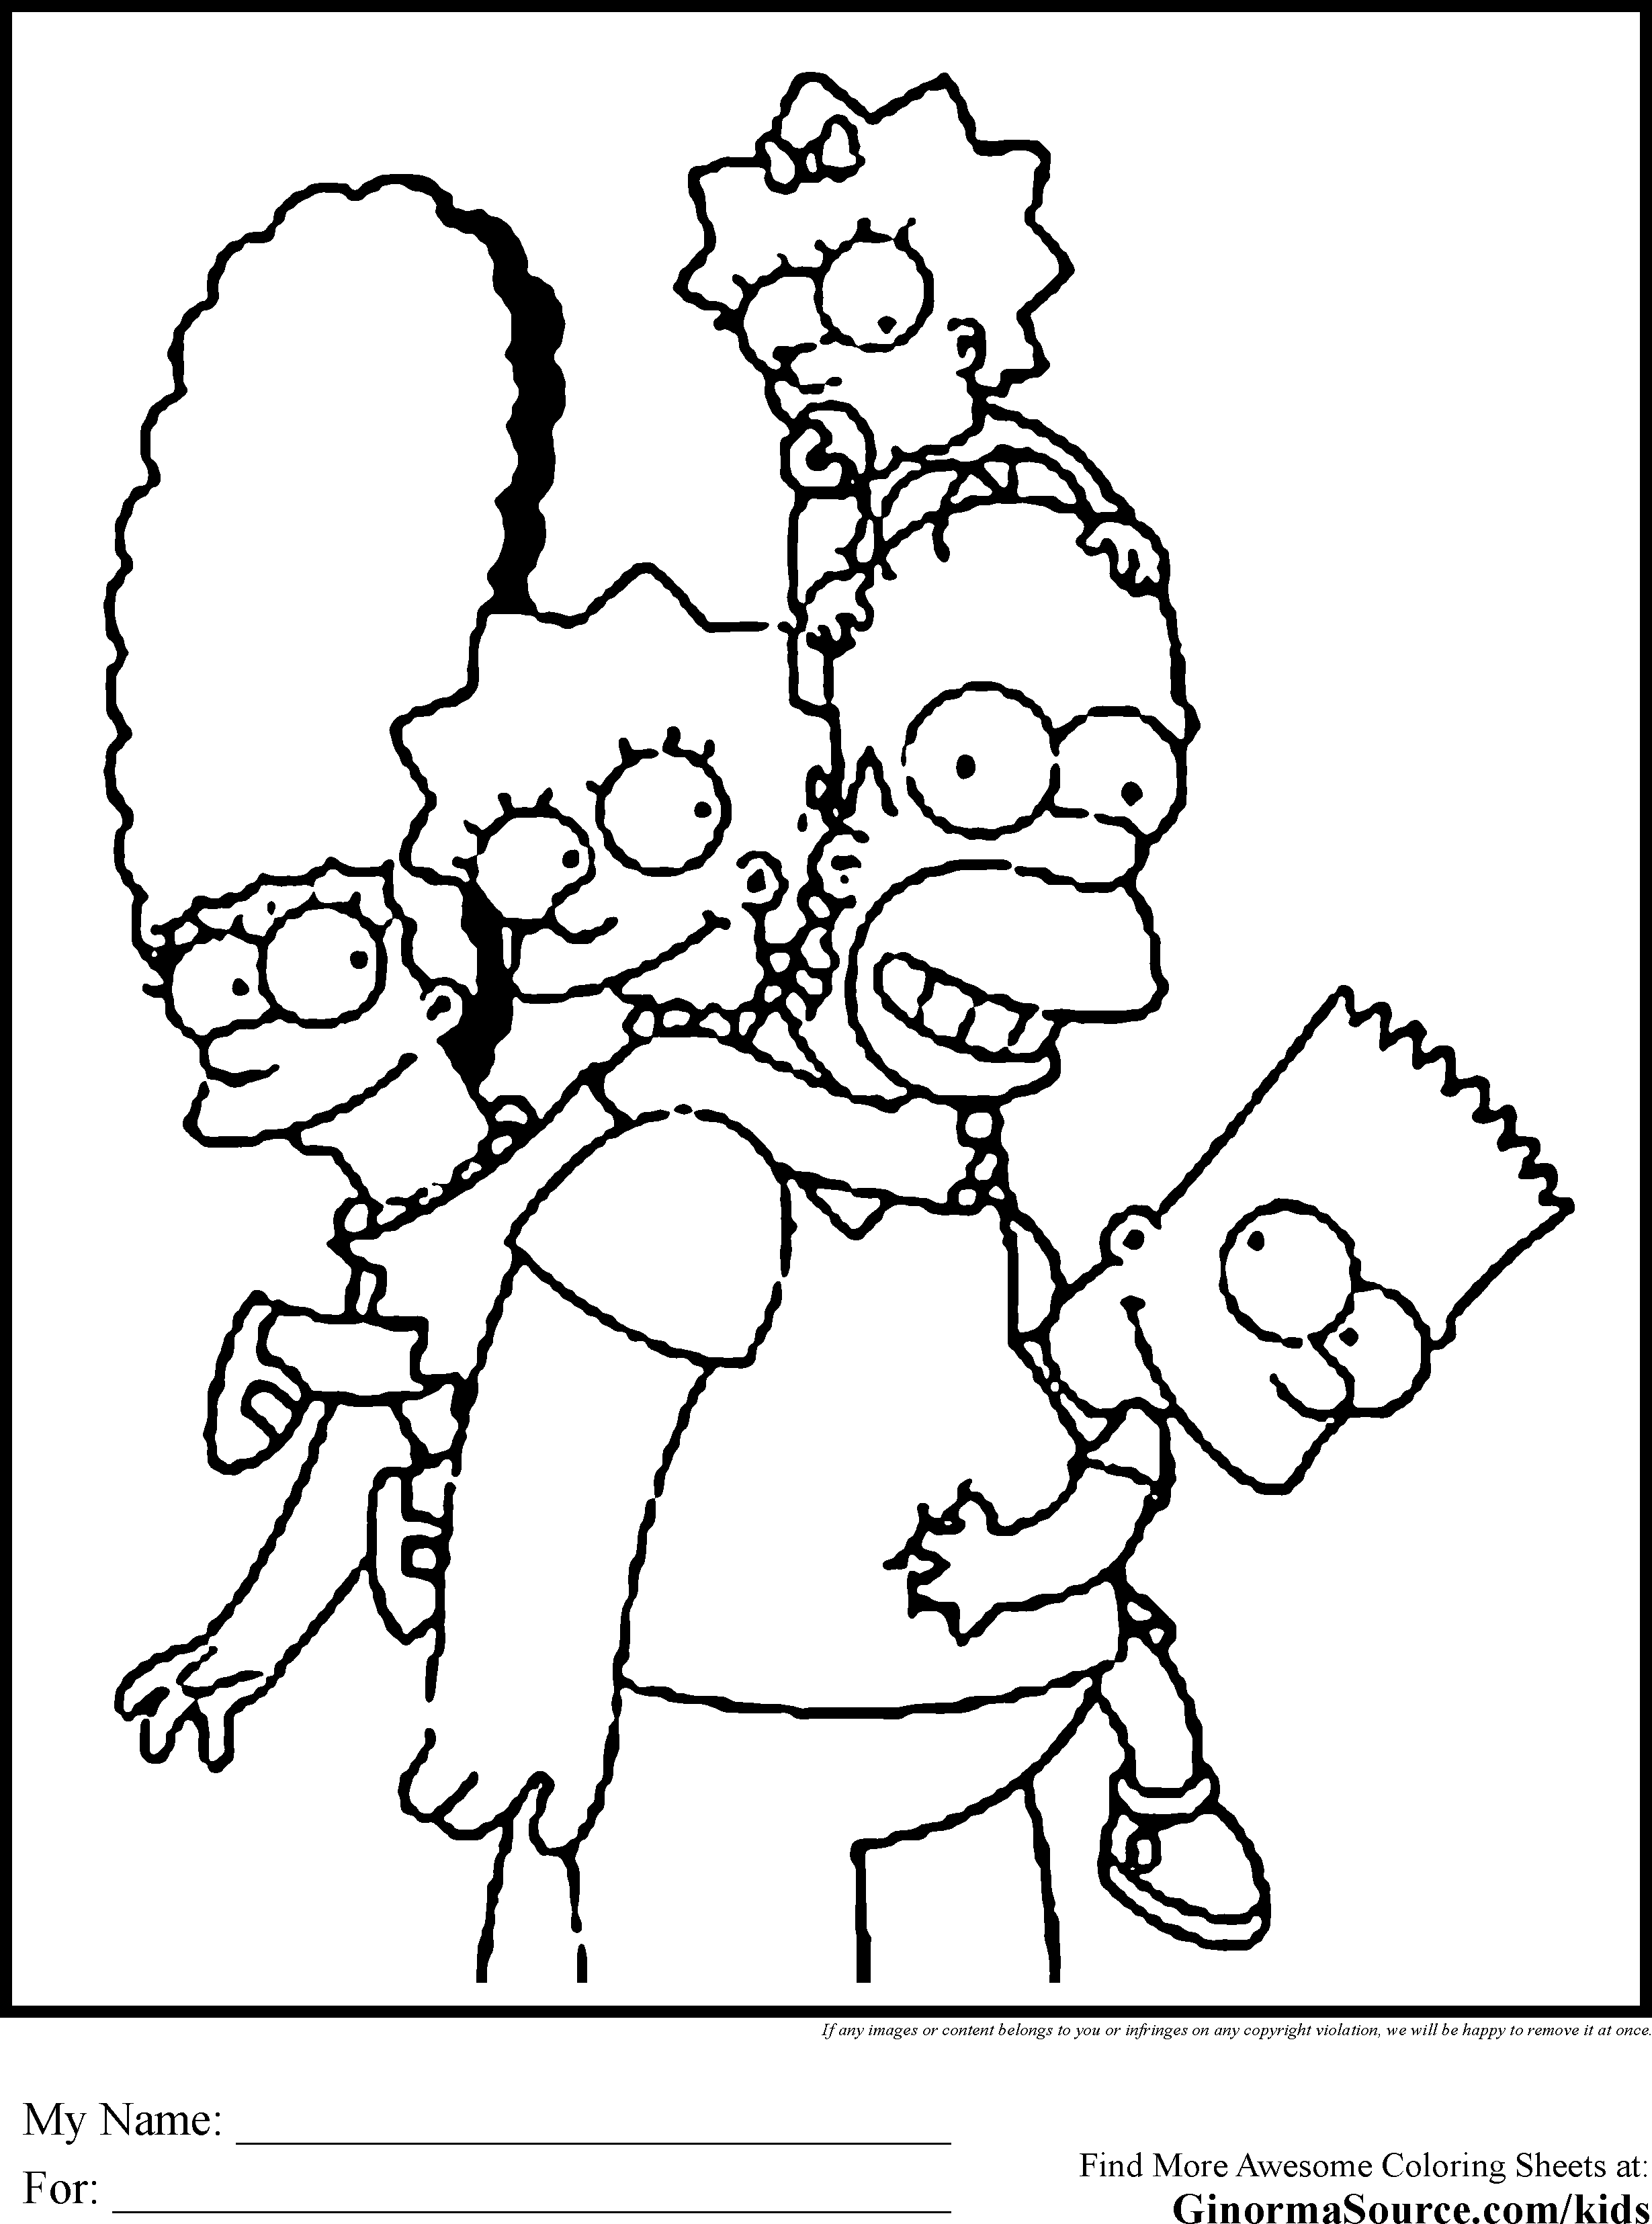 Simpsons - Coloring Pages for Kids and for Adults